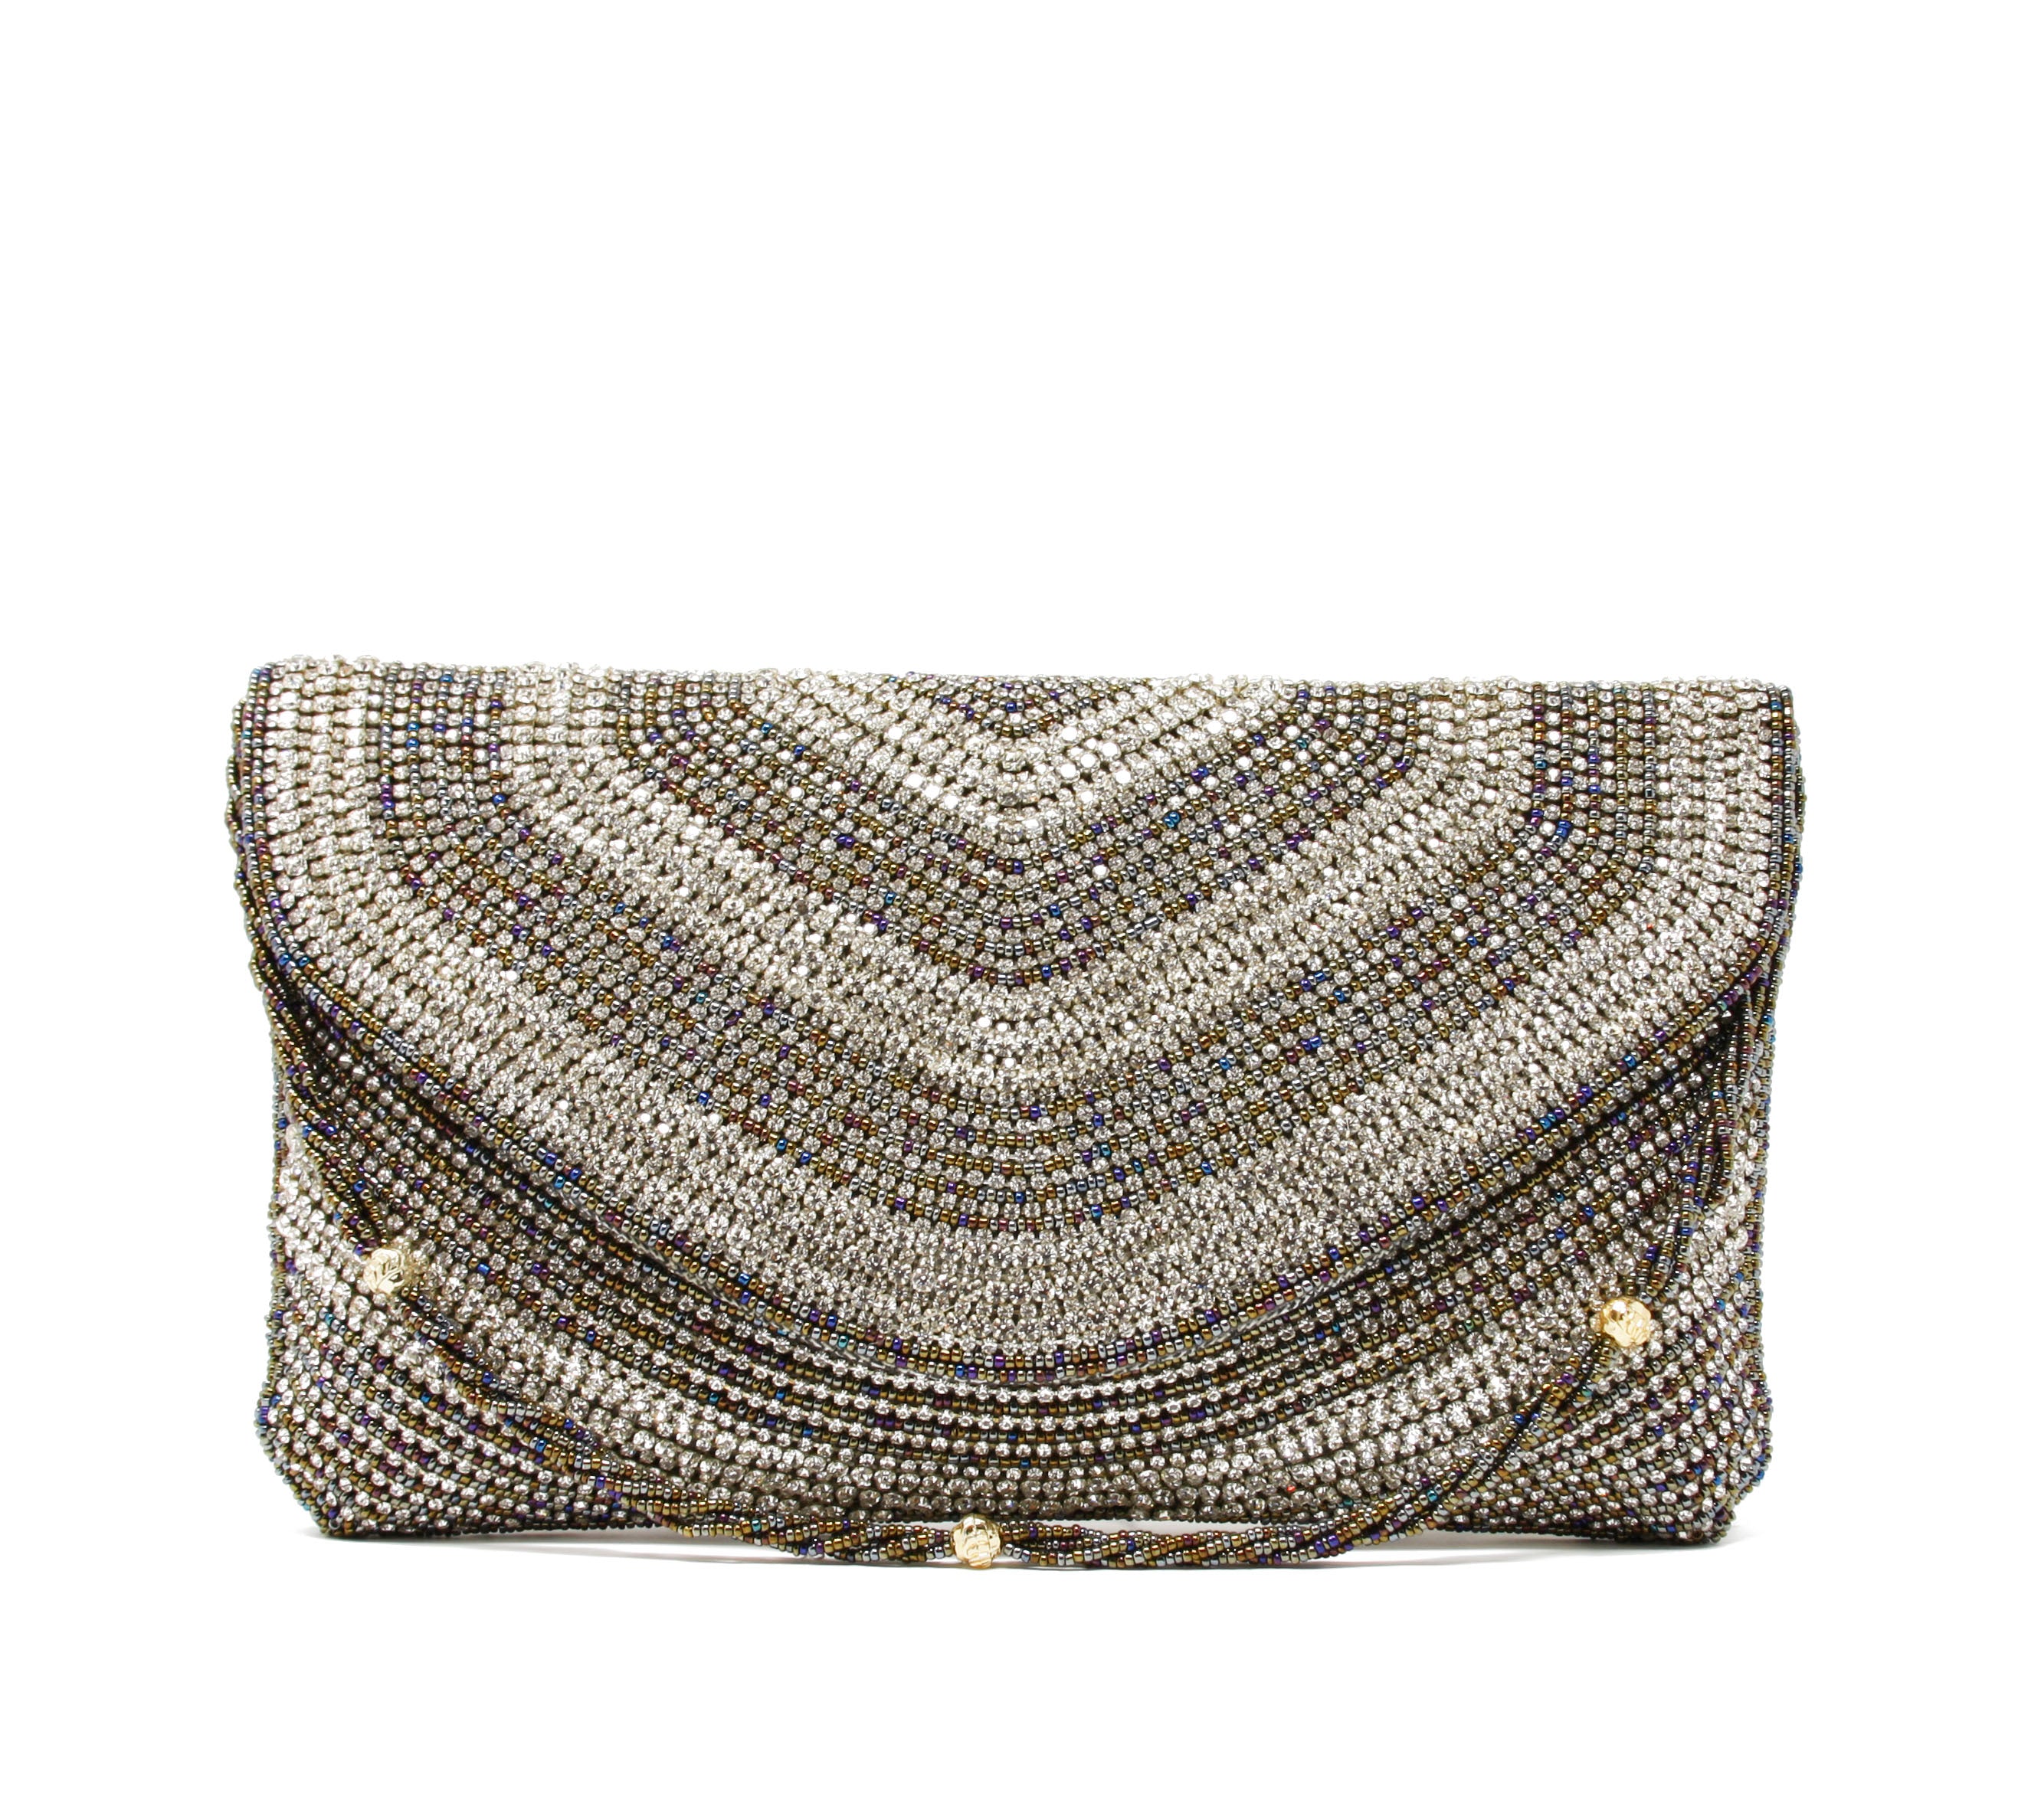 Sparkly Silver and Gray clutch and evening bag Covered with multi-colored beads, rhinestones, and crystals.